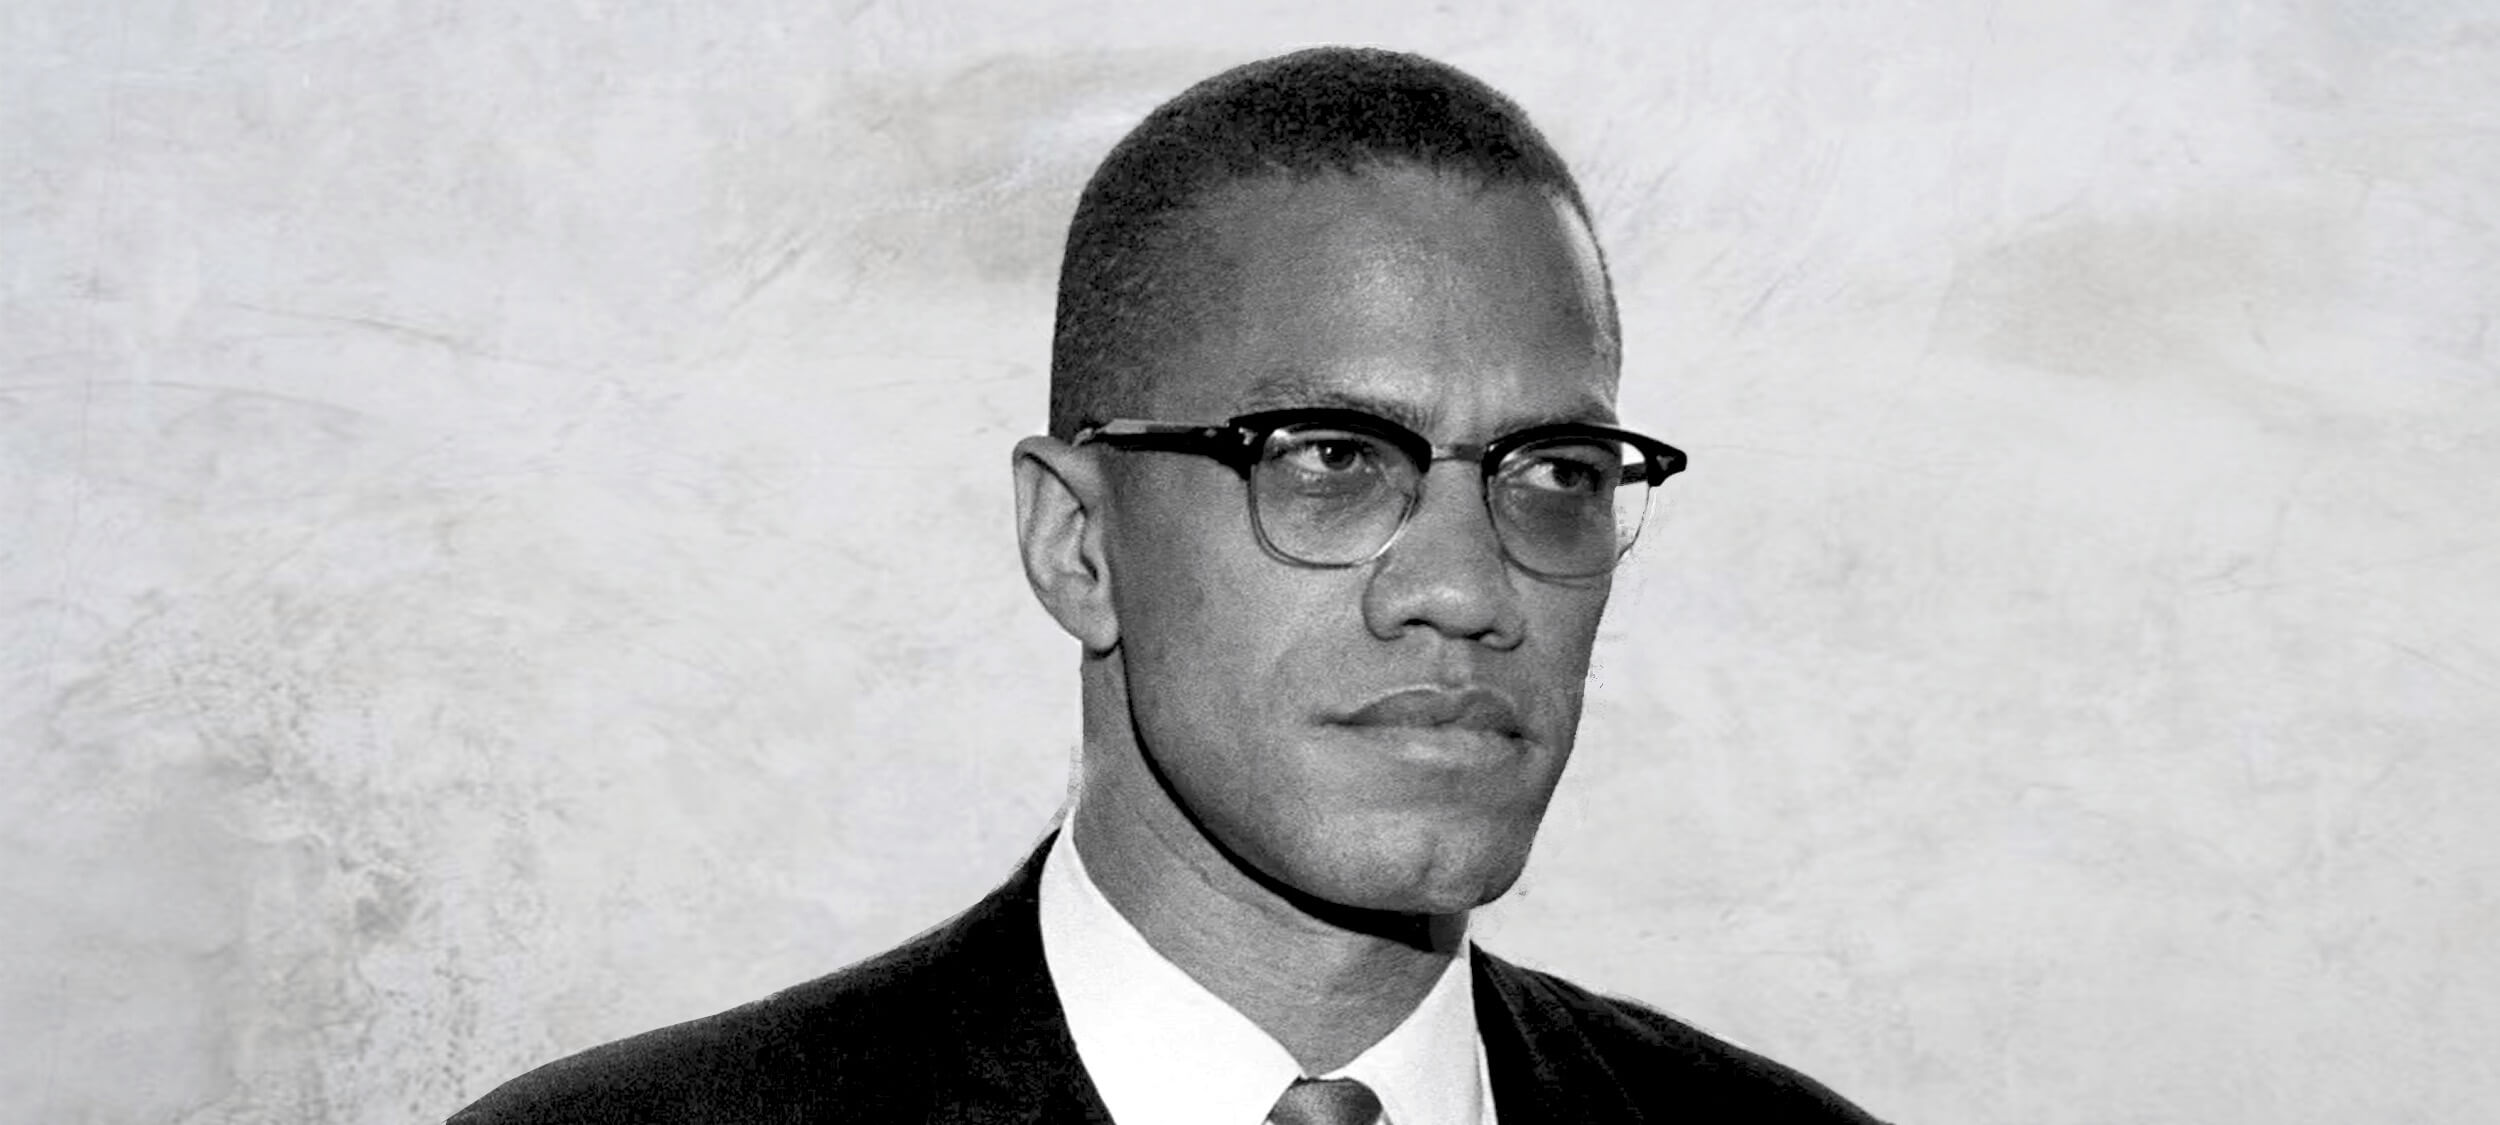 How tall is Malcolm X?